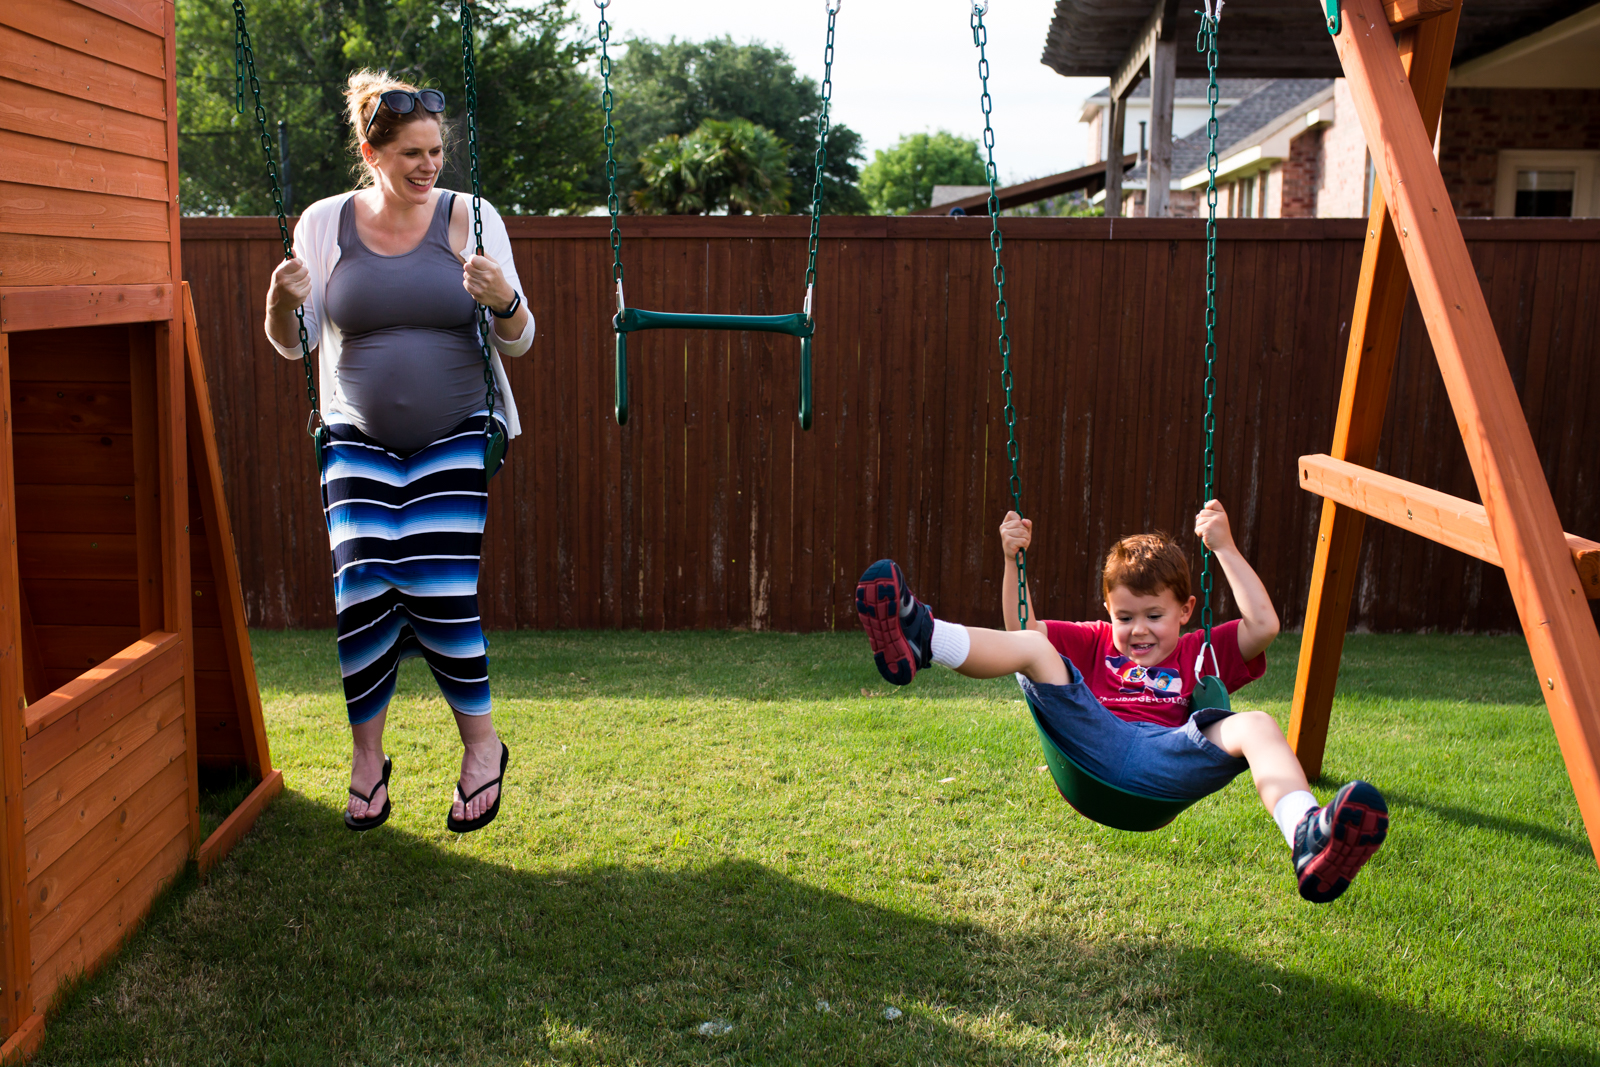 McKinney Maternity Photographer Lawren Rose Photography catches a great moment with her camera of a pregnant Mom and her redheaded son swinging on a swing set in their backyard